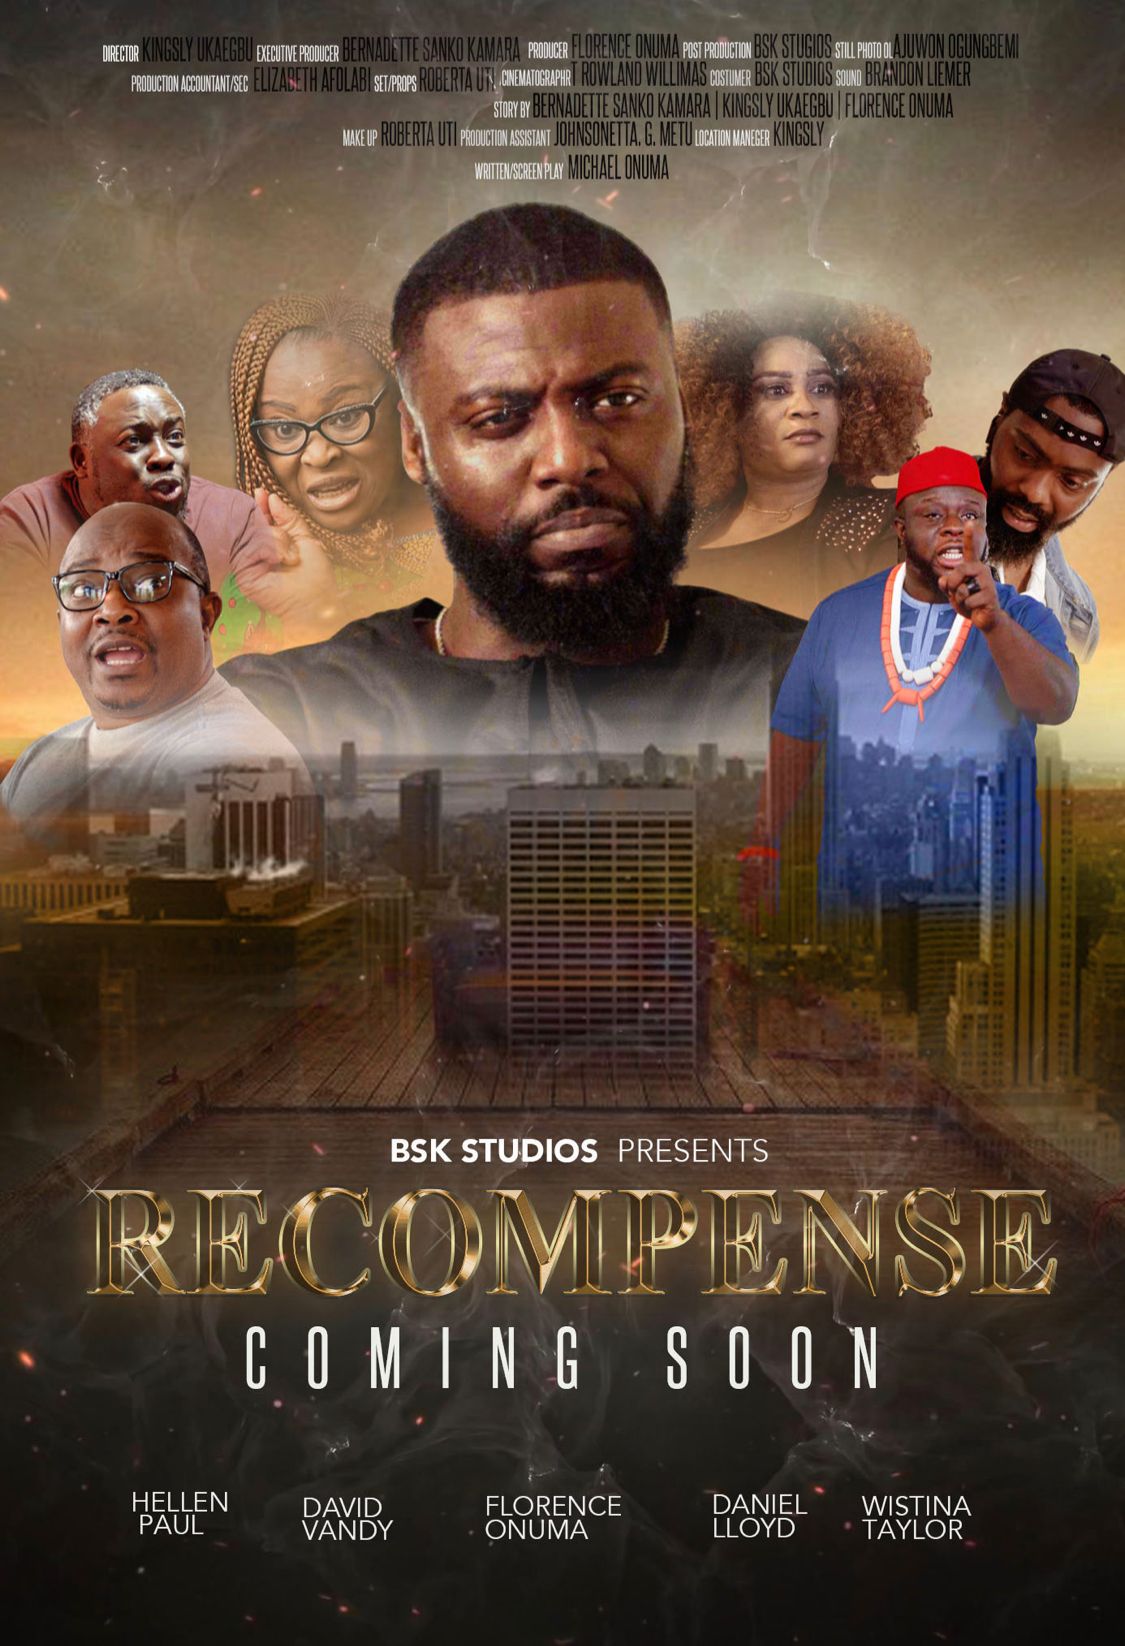 Recompense: Blockbuster movie starring Helen Paul, Daniel Lloyd and others to hit cinema nationwide